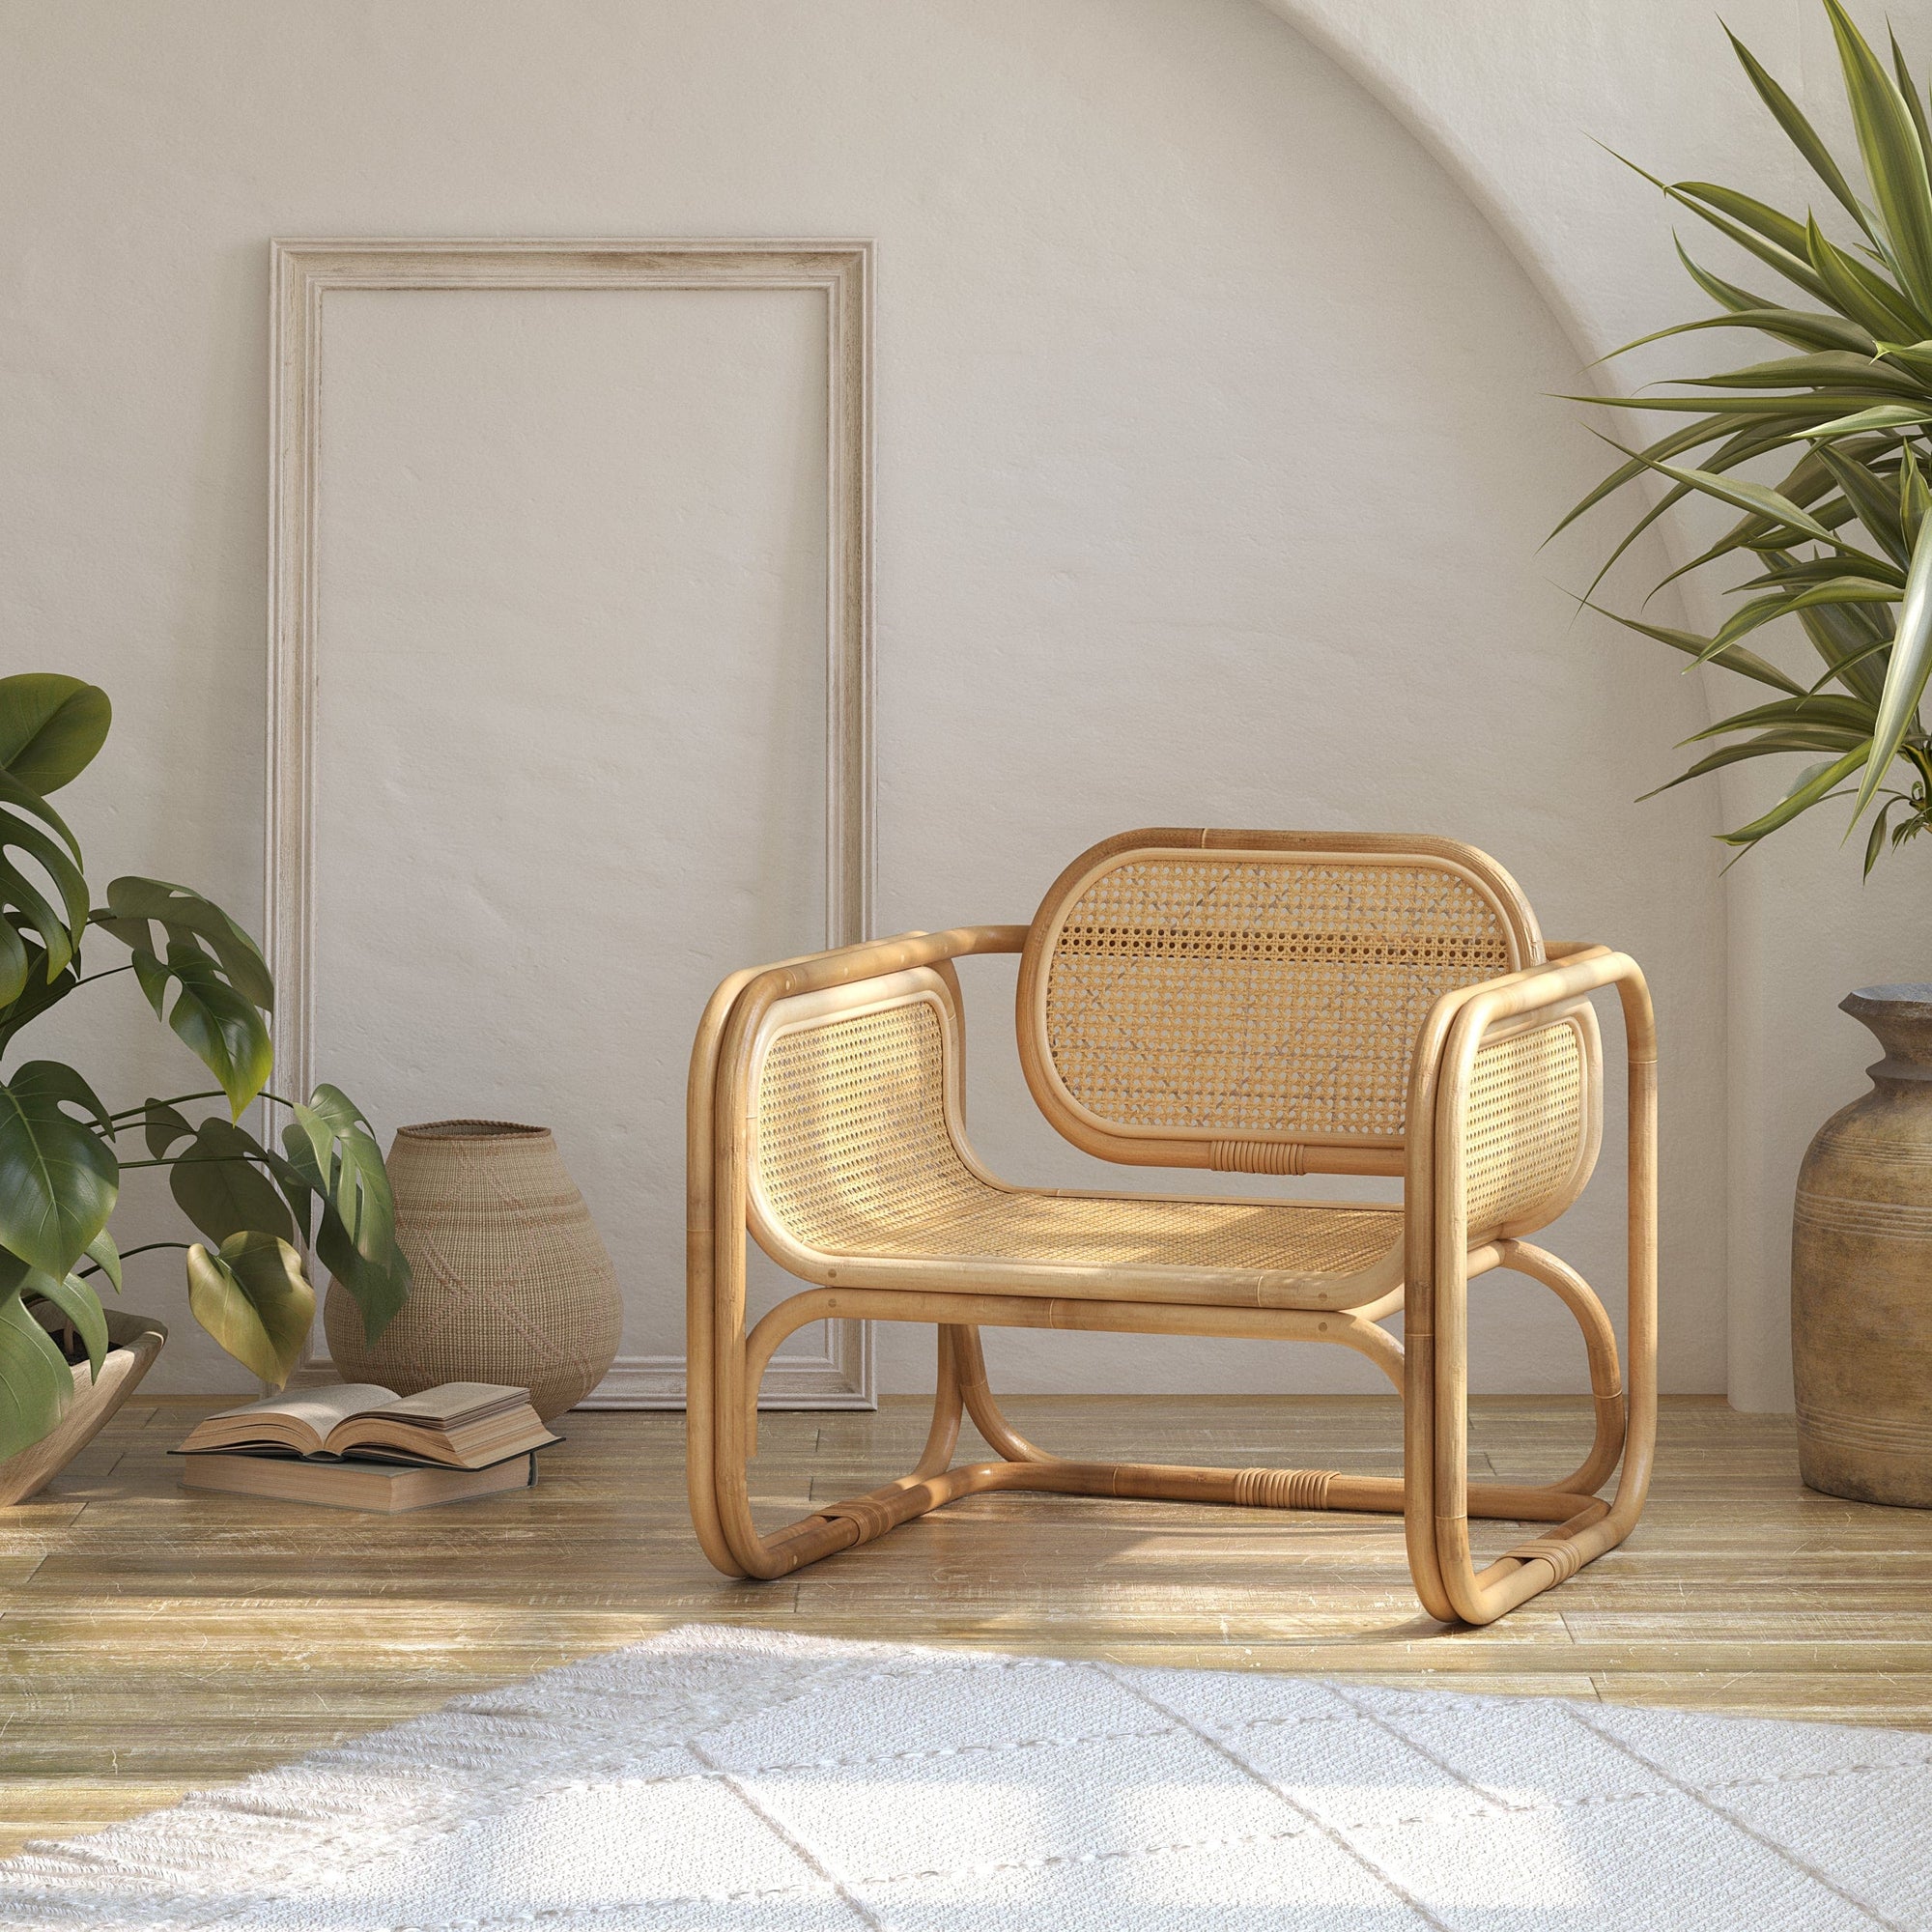 Iconic Rustic Wooden Lounge Chair